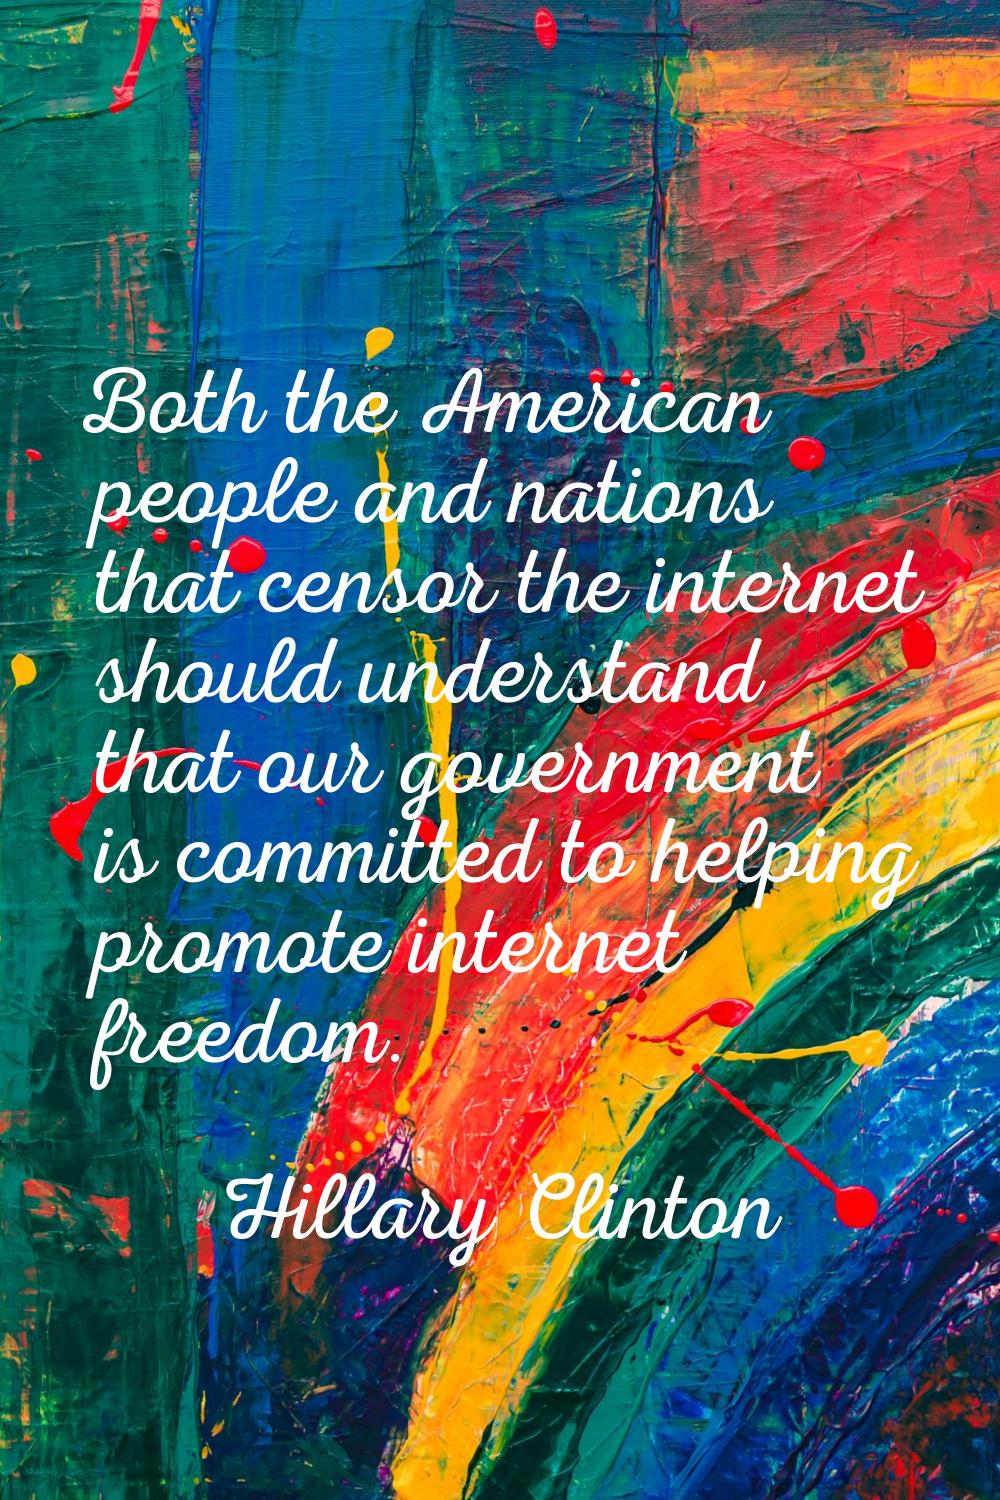 Both the American people and nations that censor the internet should understand that our government